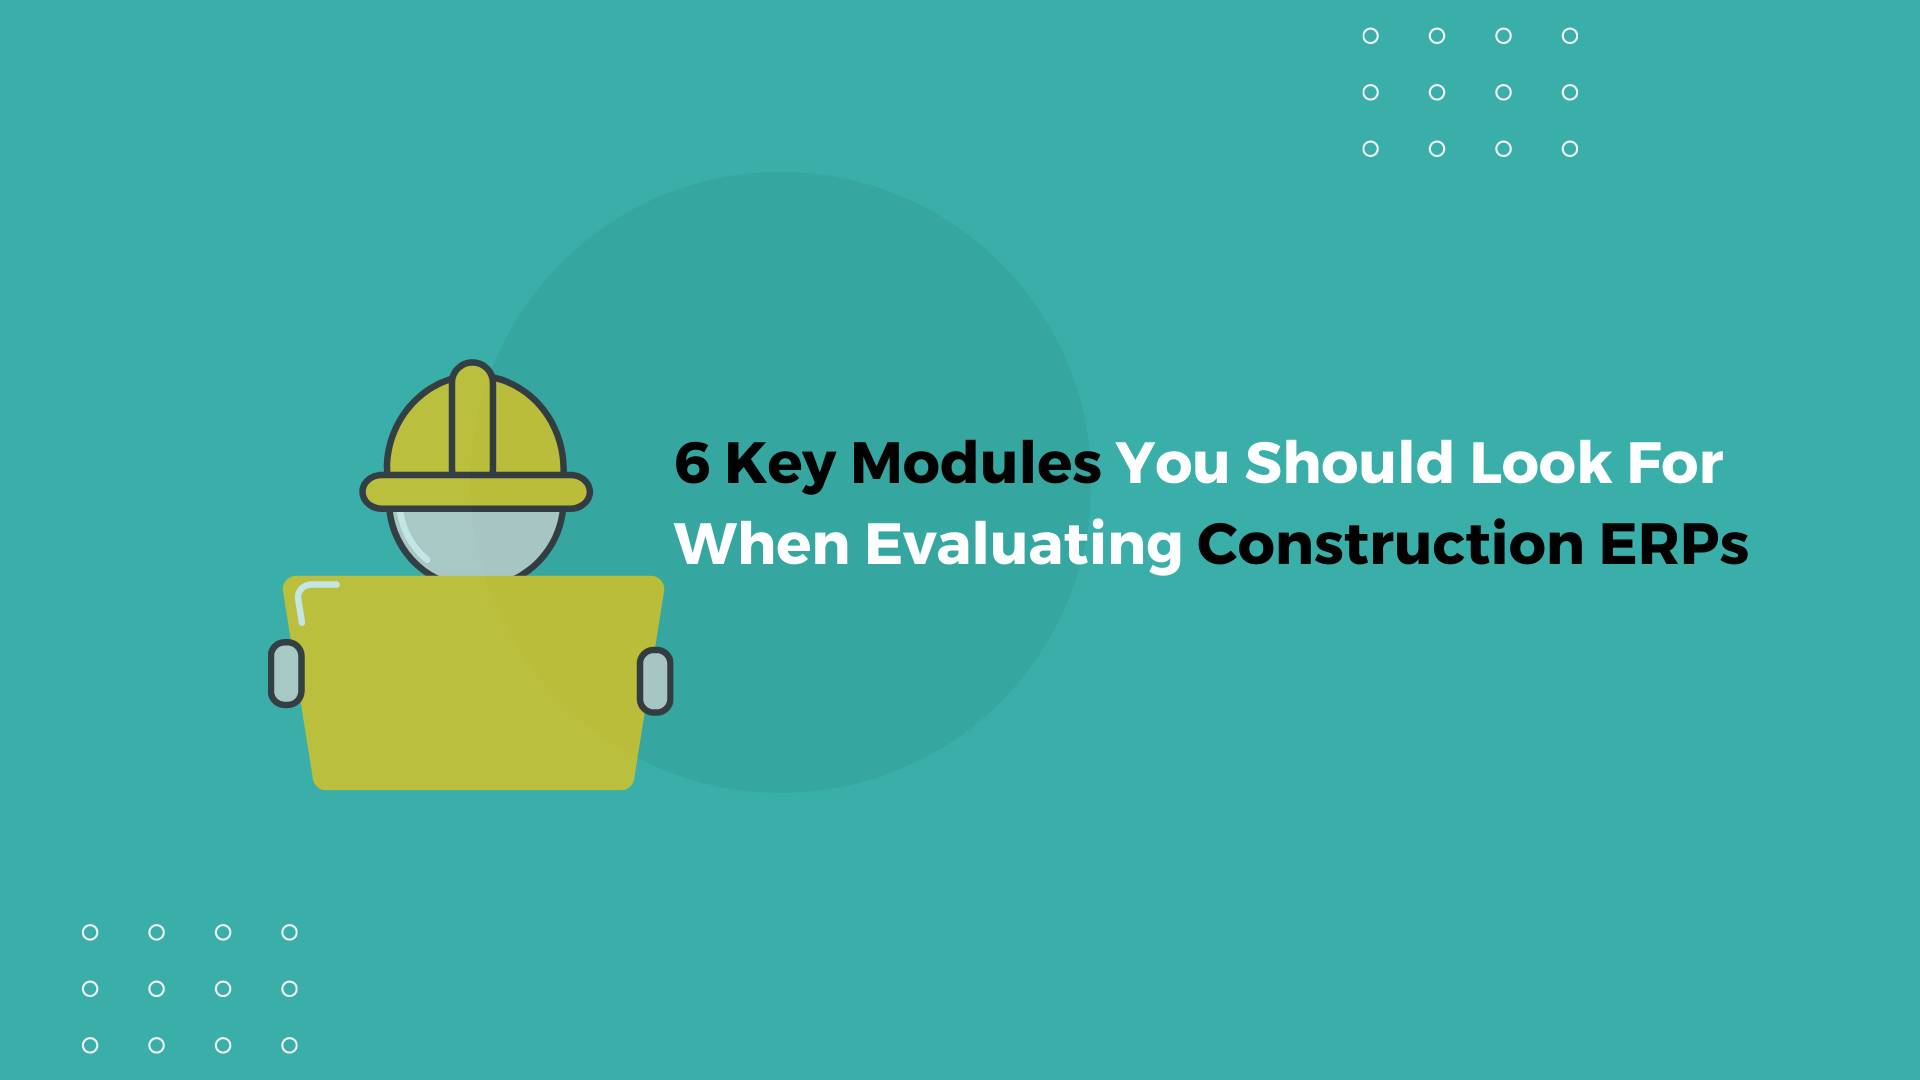 6 Key Modules You Should Look For When Evaluating Construction ERPs